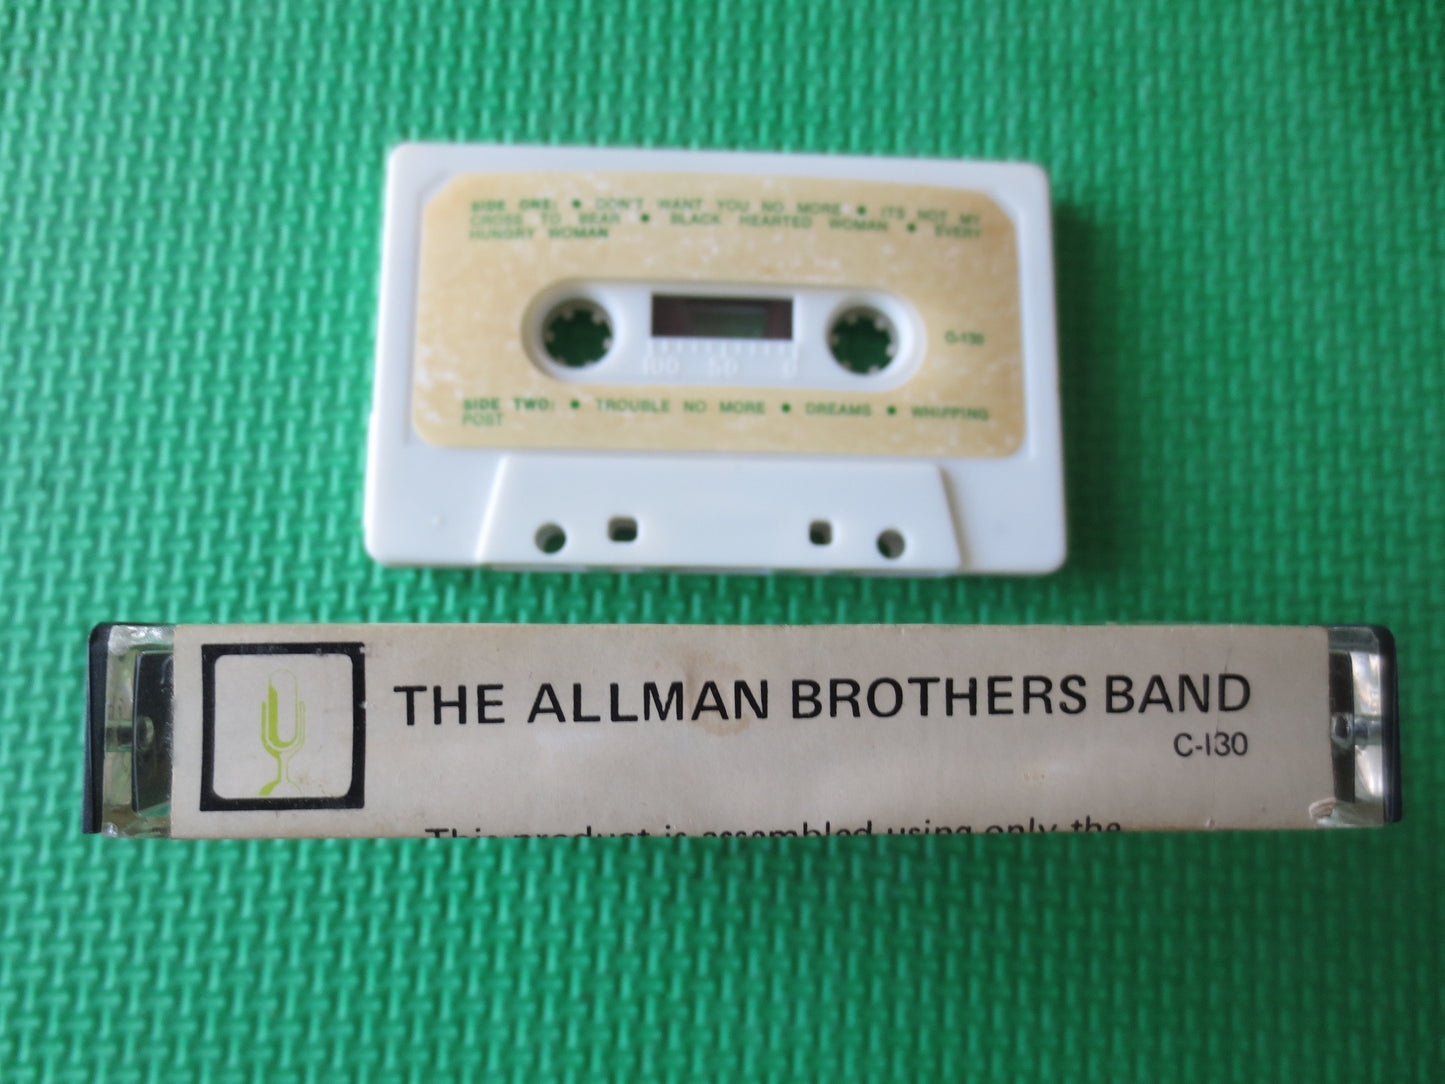 The ALLMAN BROTHERS,  Allman Brothers Tape, Tape Cassette, Southern Rock Tape, Rock Tapes, Pop Music Cassette, 1972 Cassette